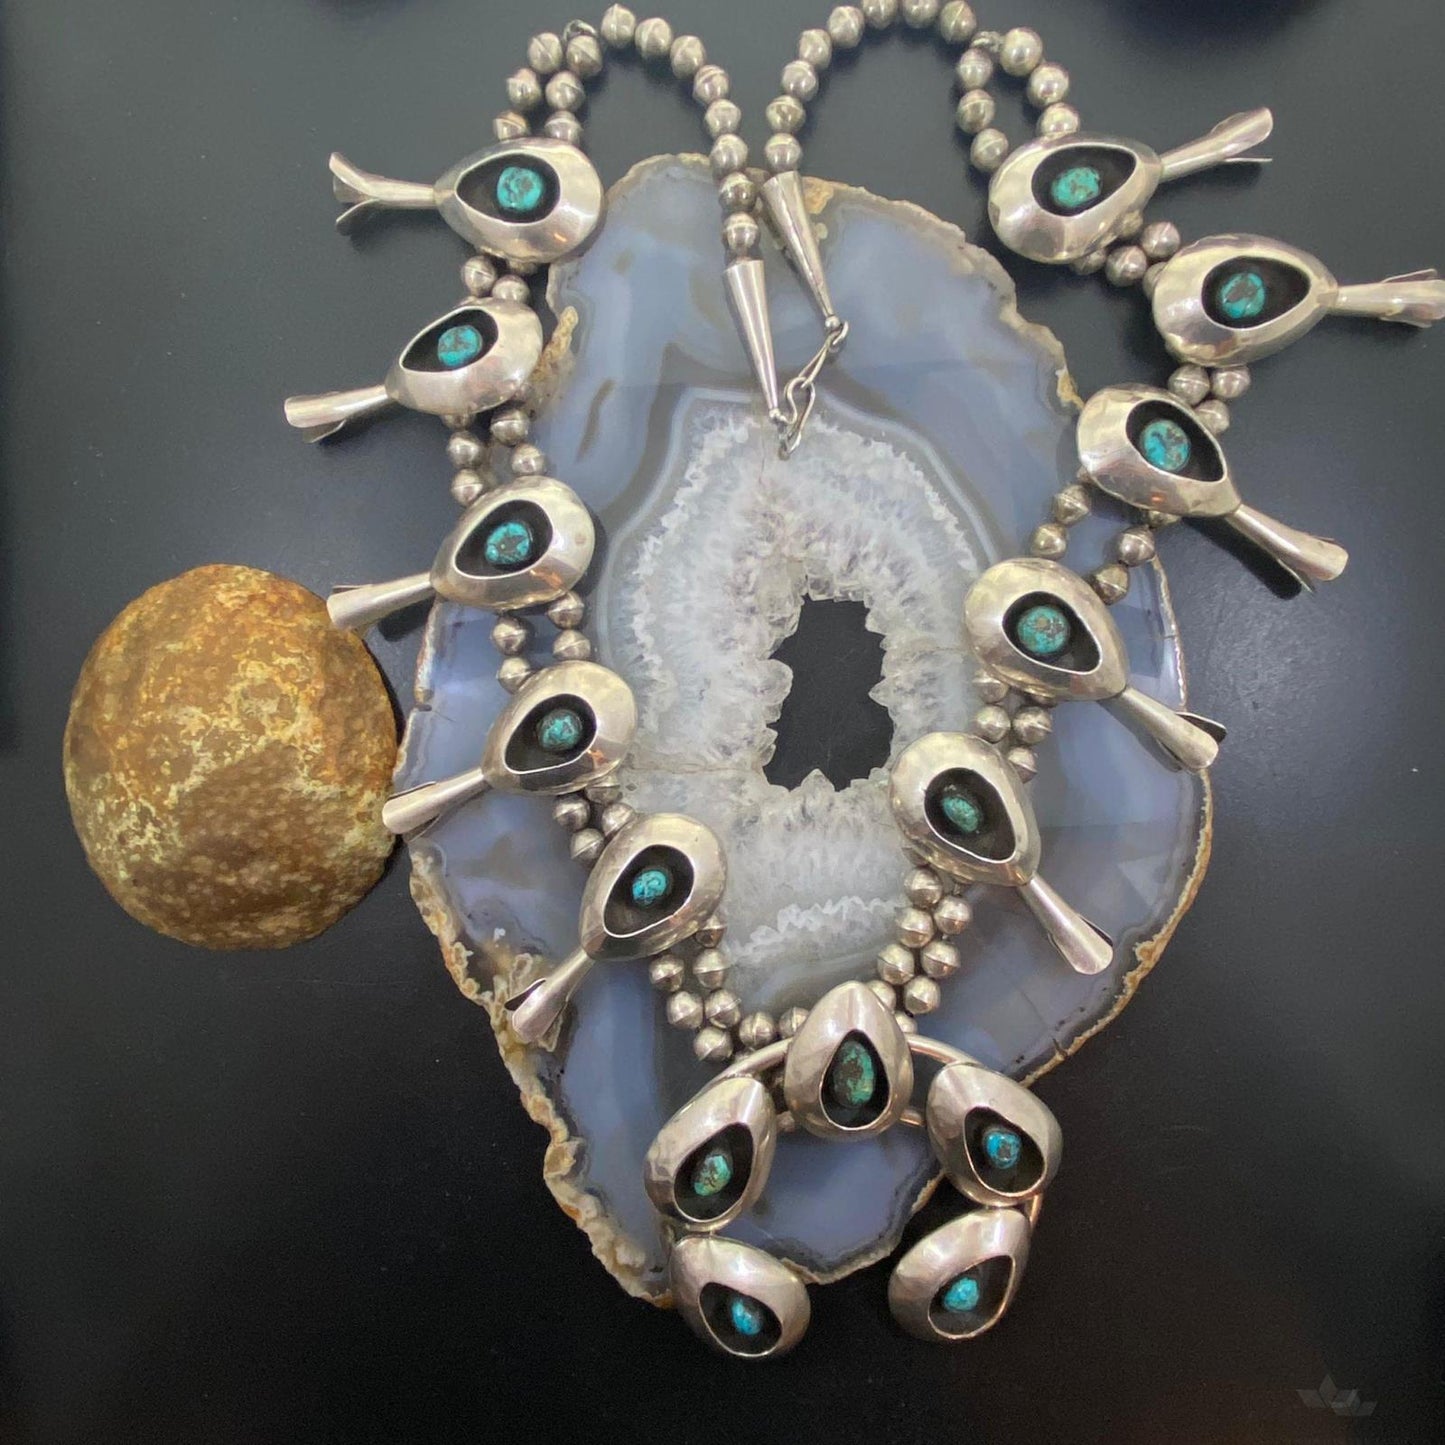 Native American Silver Shadow Box Turquoise Squash Blossom Necklace 31"